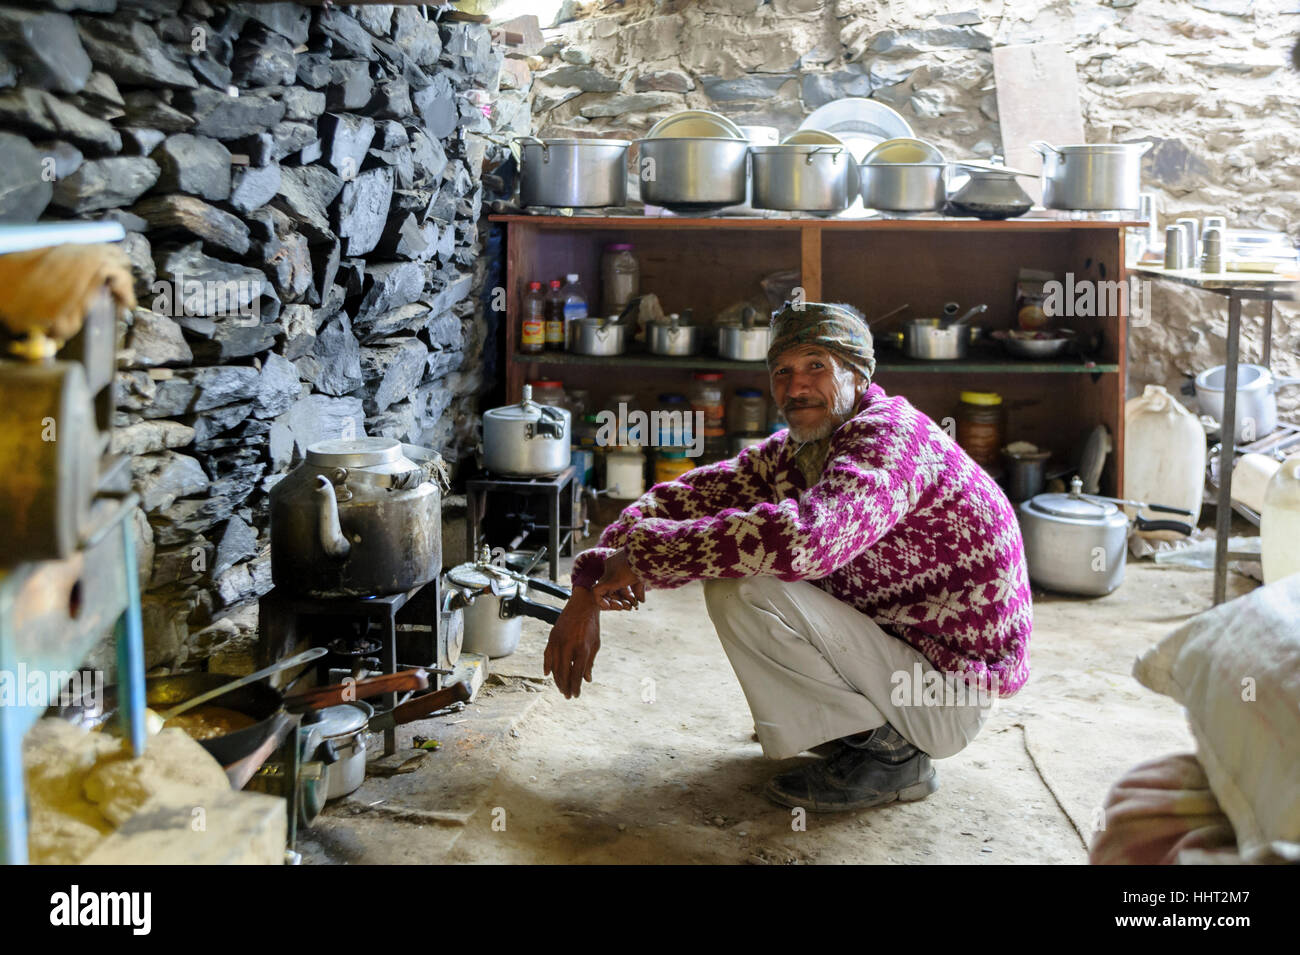 Indian man preparing tea and other hot drinks in a typical rudimentary coffee shop in the Himalayas, India Stock Photo